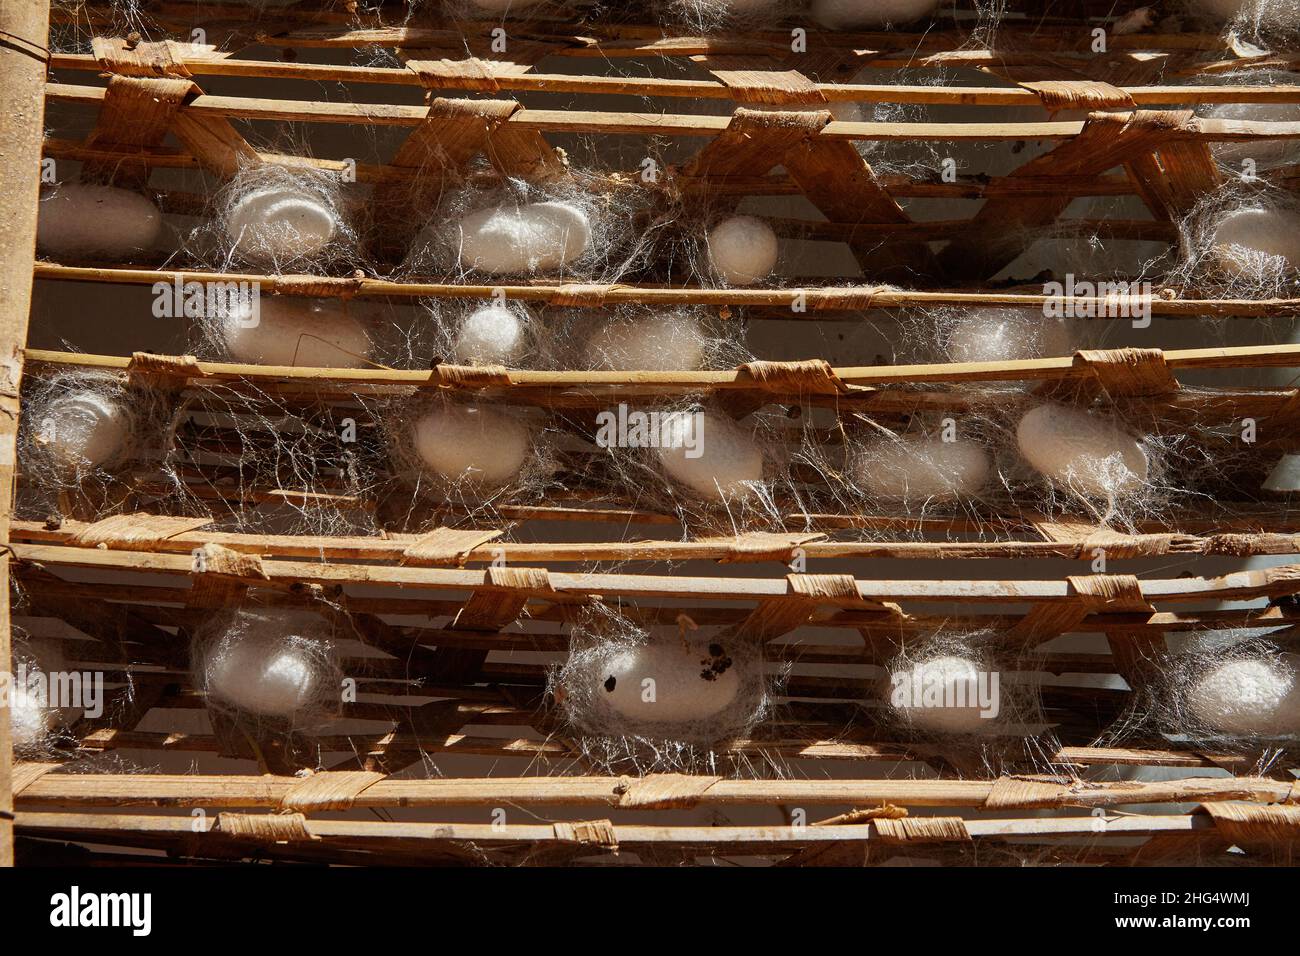 Silkworm cocoons (Bombys mori) on wooden frame, production of silk thread. Stock Photo